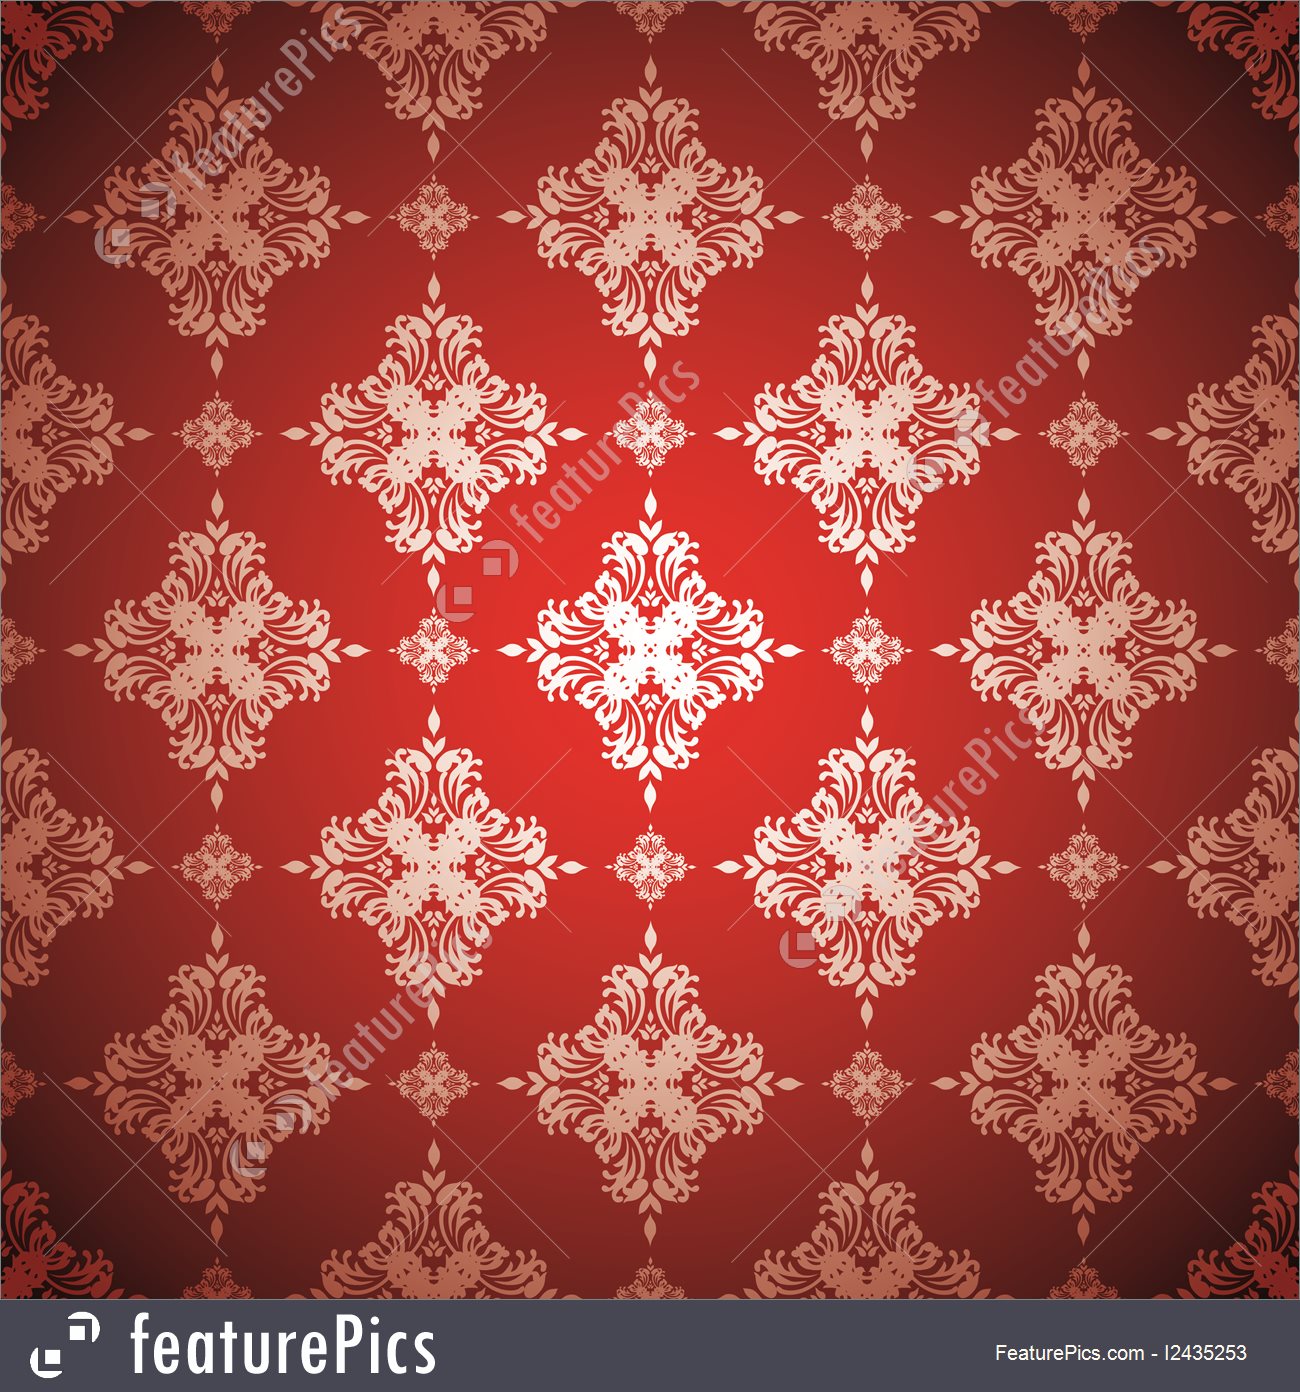 Red And Silver Seamless Wallpaper Design With Floral - Red Wallpaper Design Floral - HD Wallpaper 